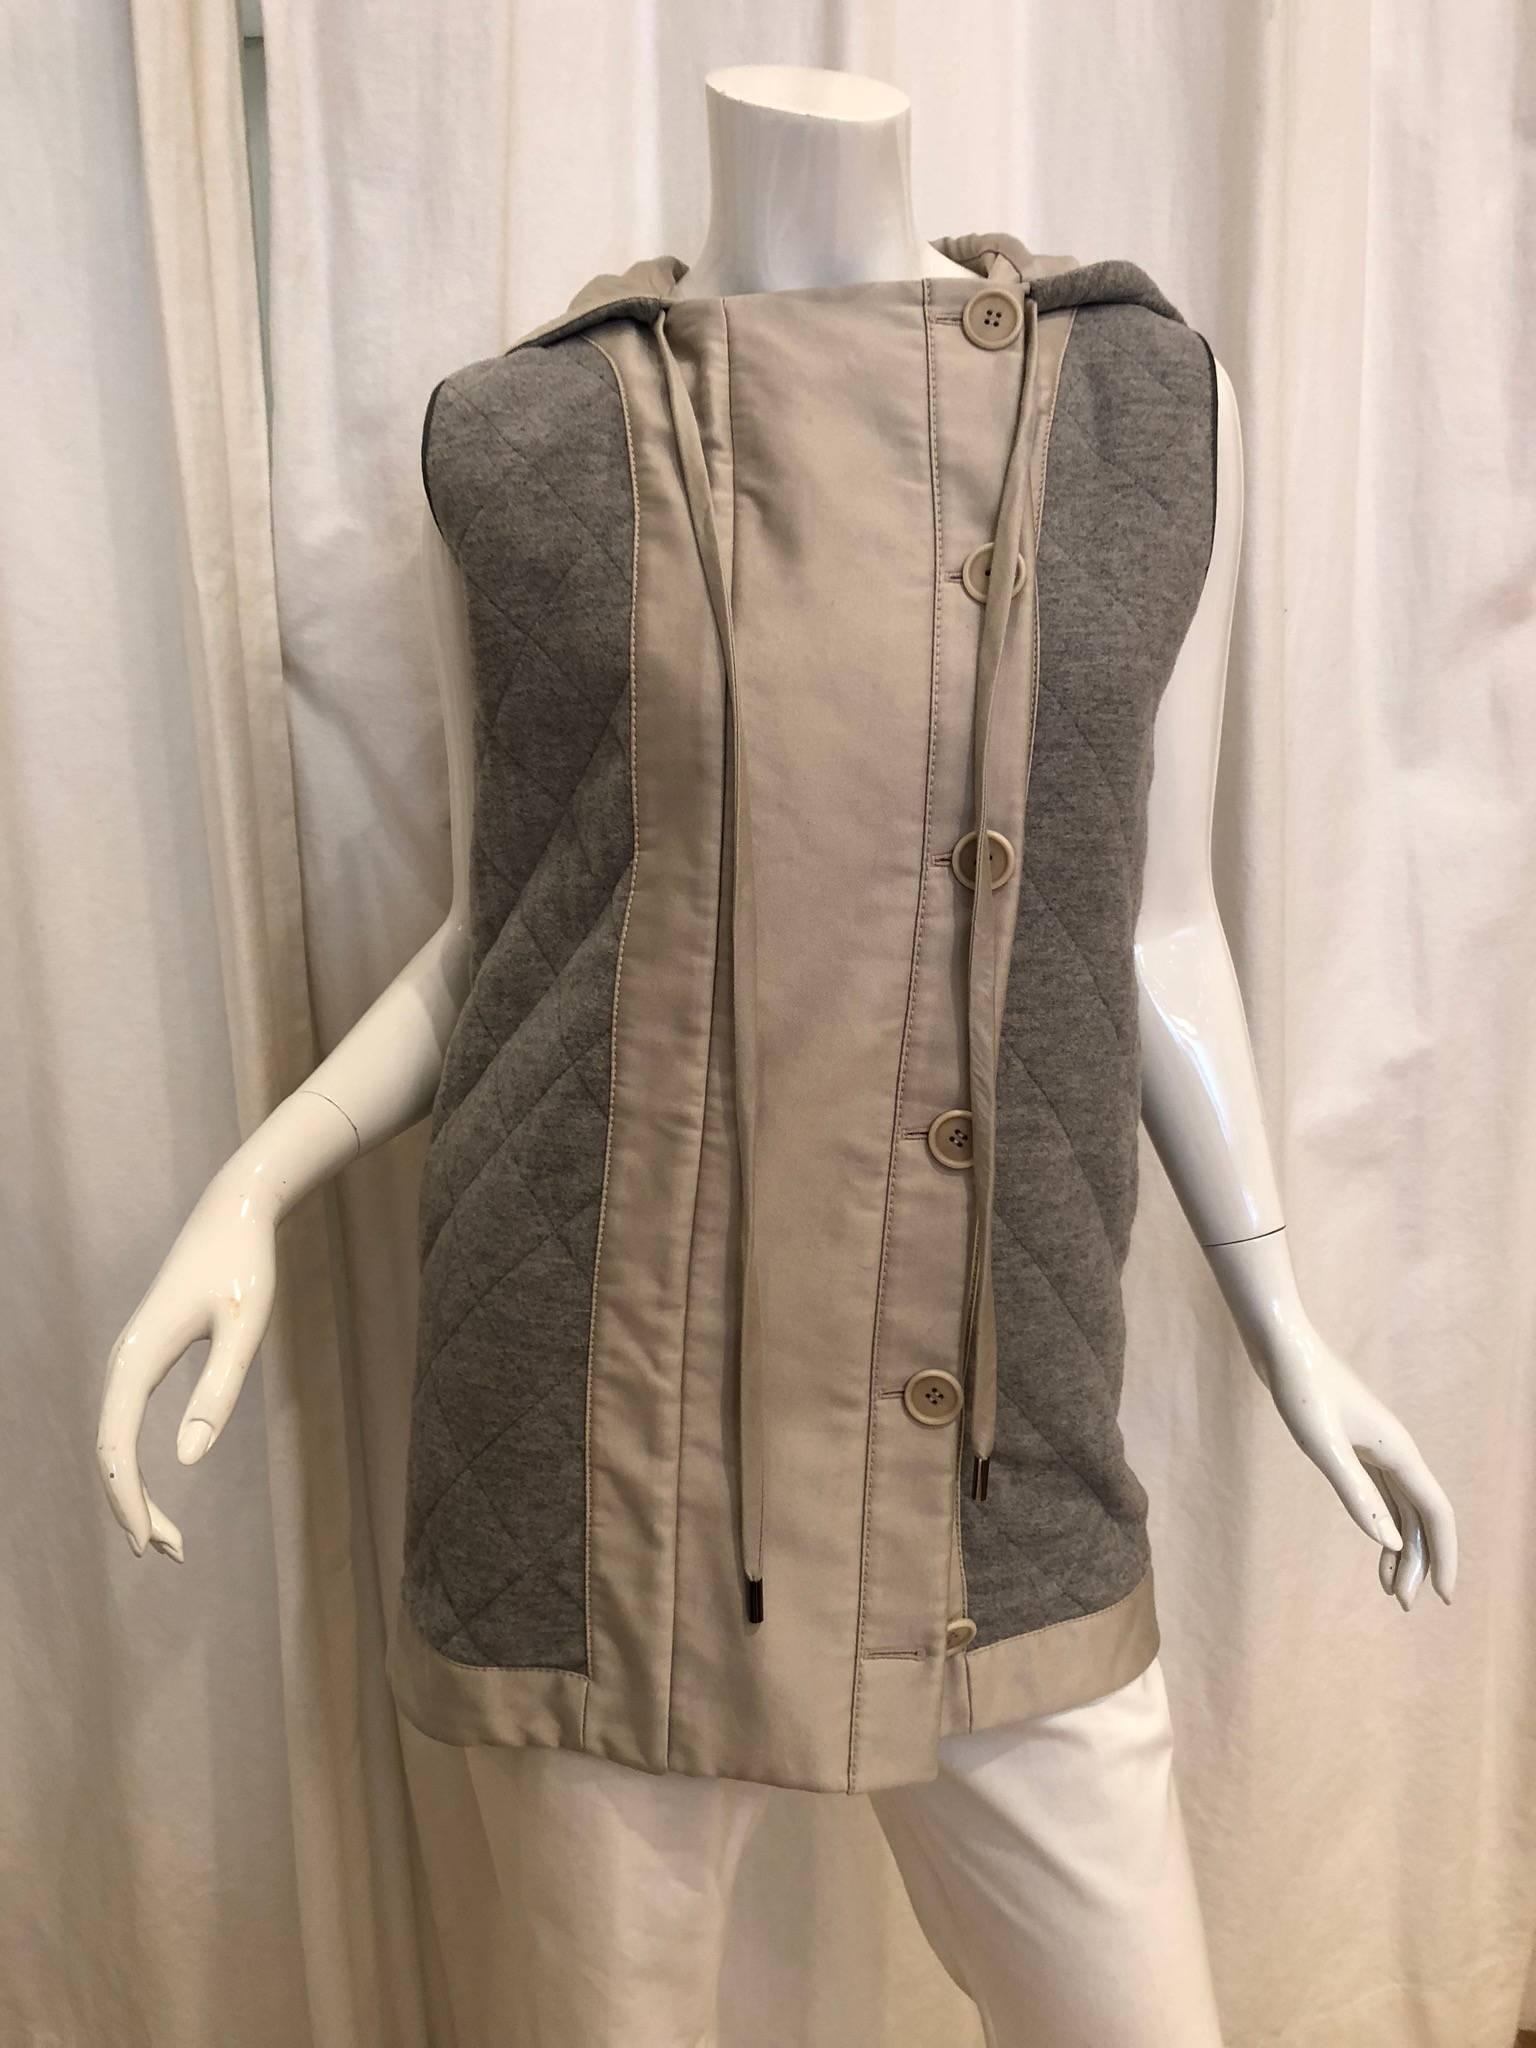 Stella McCartney Button-Down Hooded Quilted Vest with Grey and Beige Colorblock.